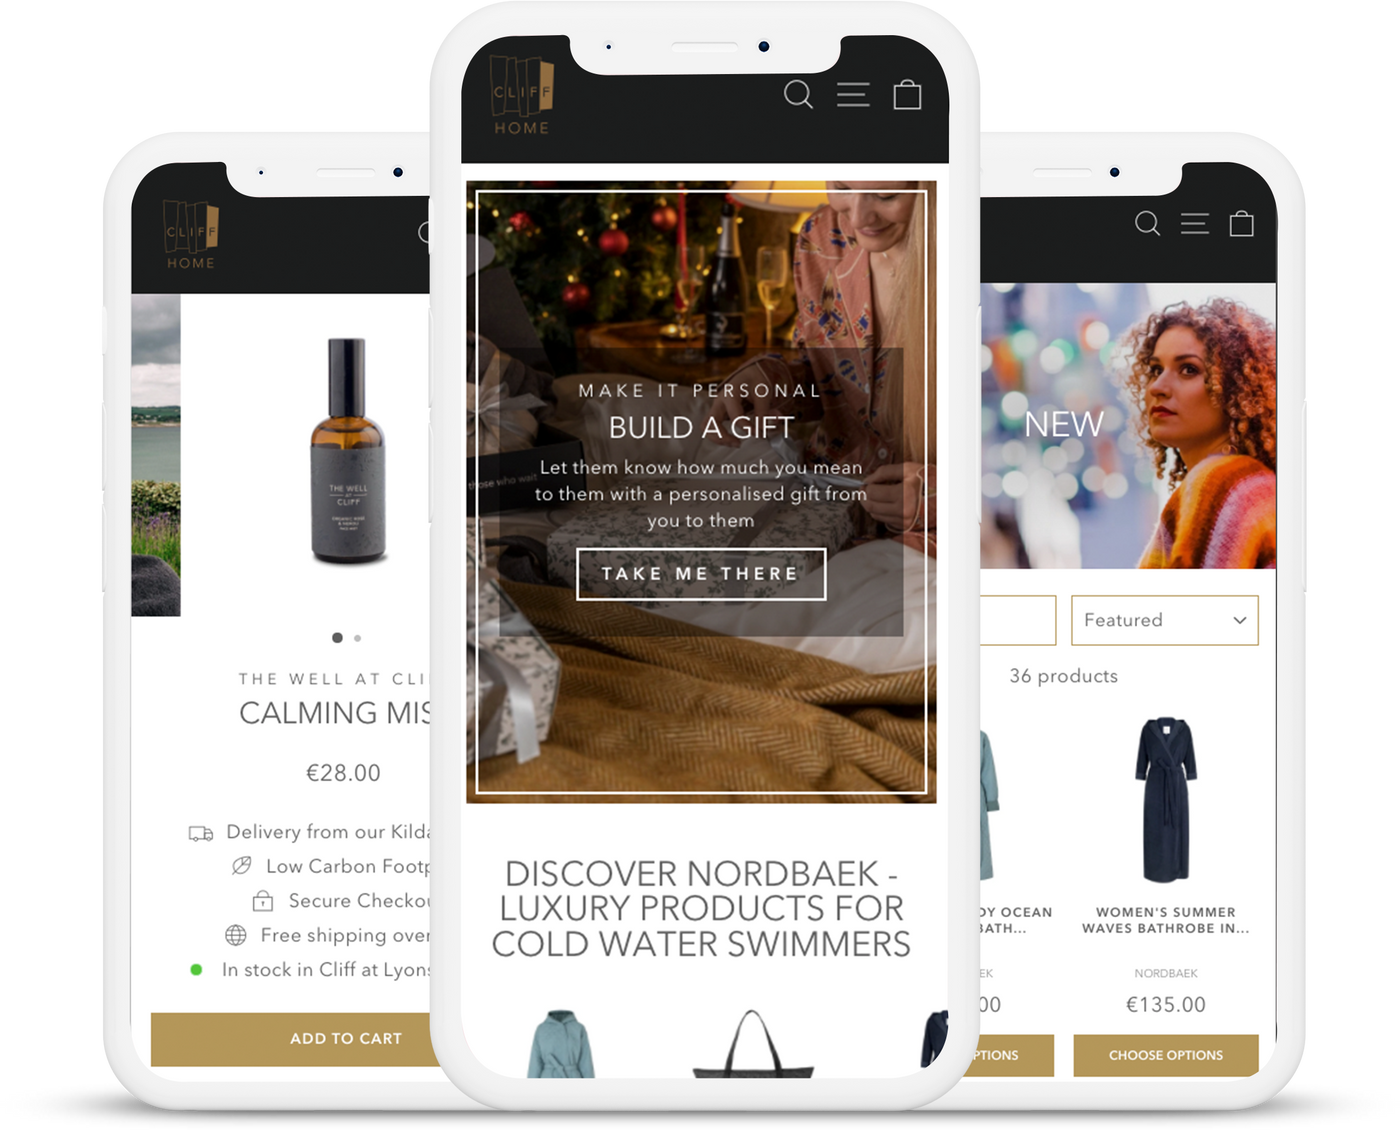 Cliff Home Shopify store mobile view on 3 mobiles, built by Milk Bottle Labs Dublin